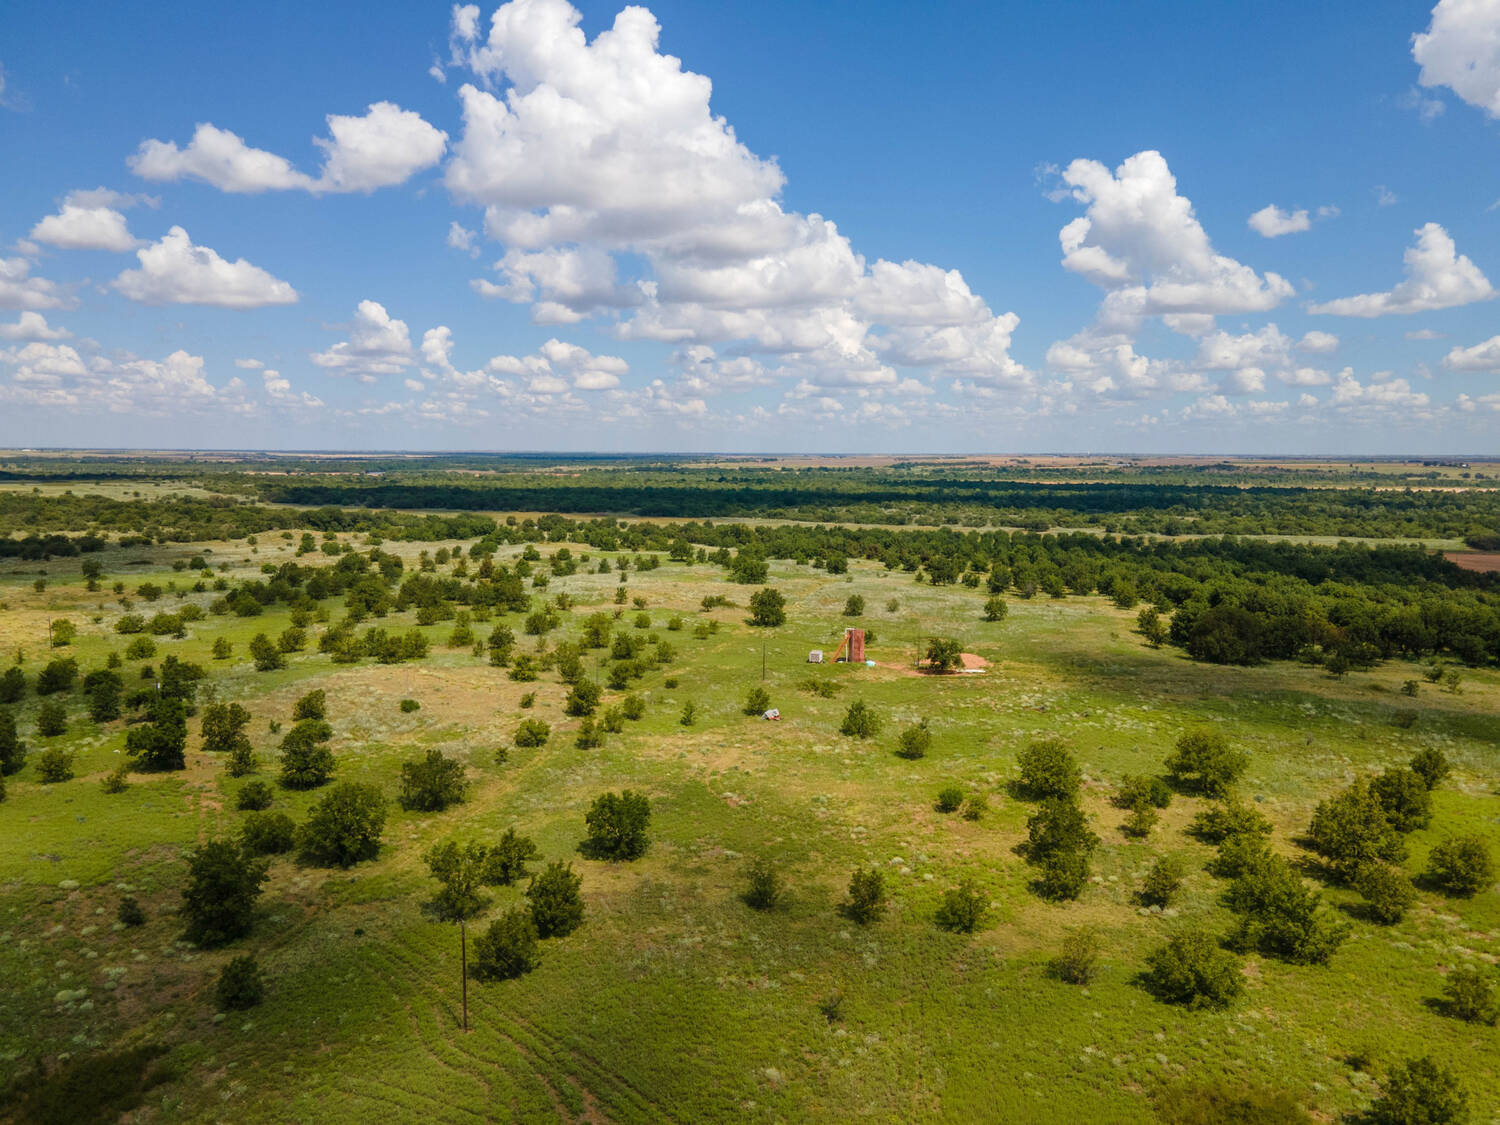 The-Pecan-Tract-Clay-County-Pecan-Orchard-Hunting-Ranch-TX-Republic-Ranches-Bryan-Pickens-8-of-15